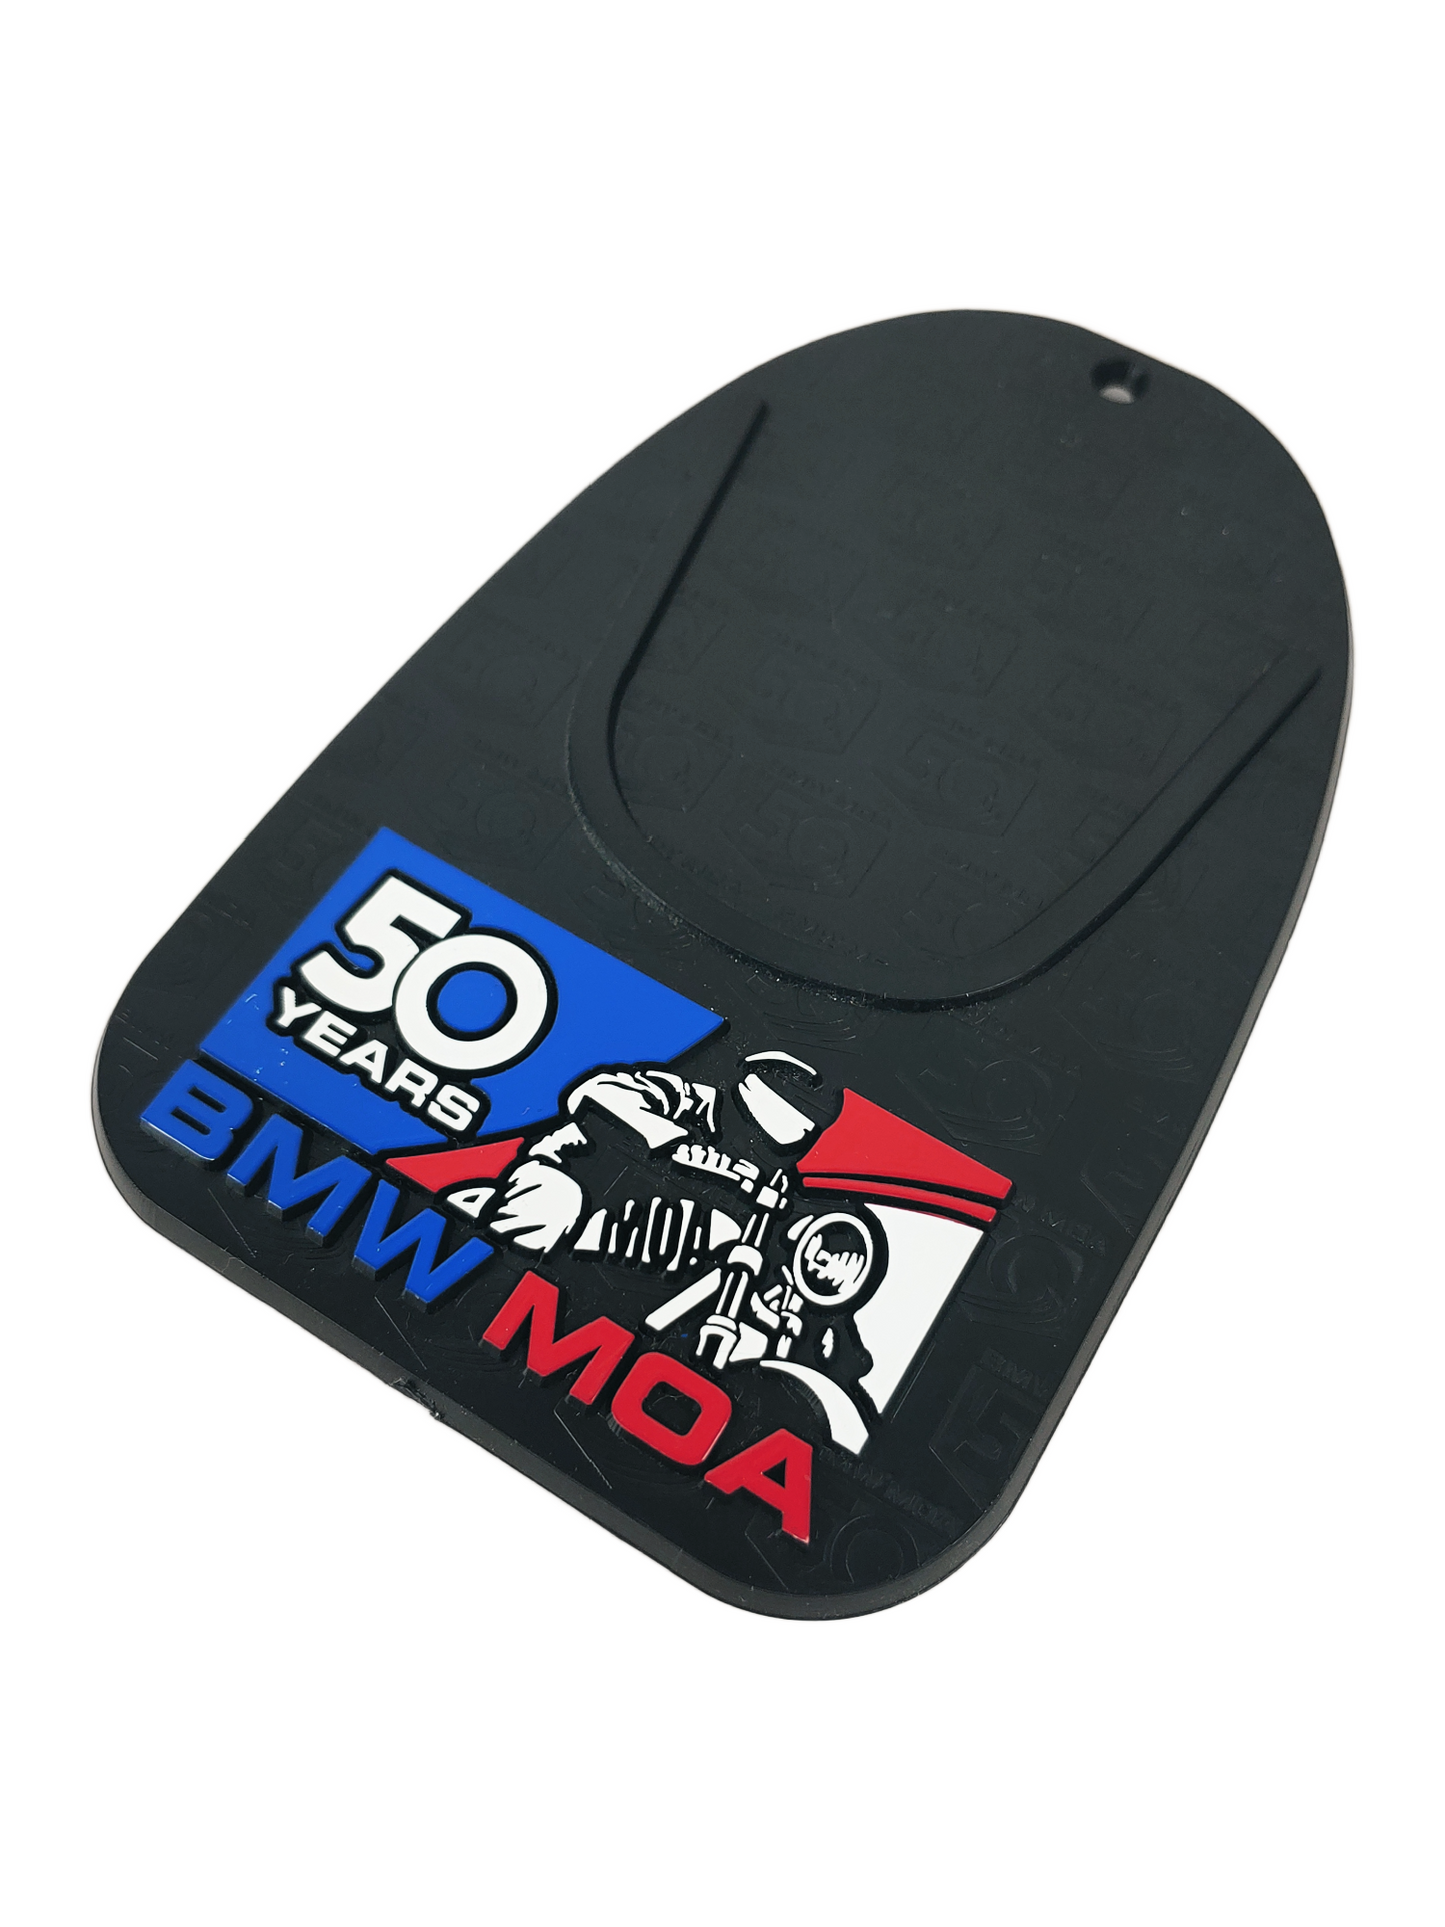 50th Anniversary - Limited Edition - Motorcycle Kickstand Plate